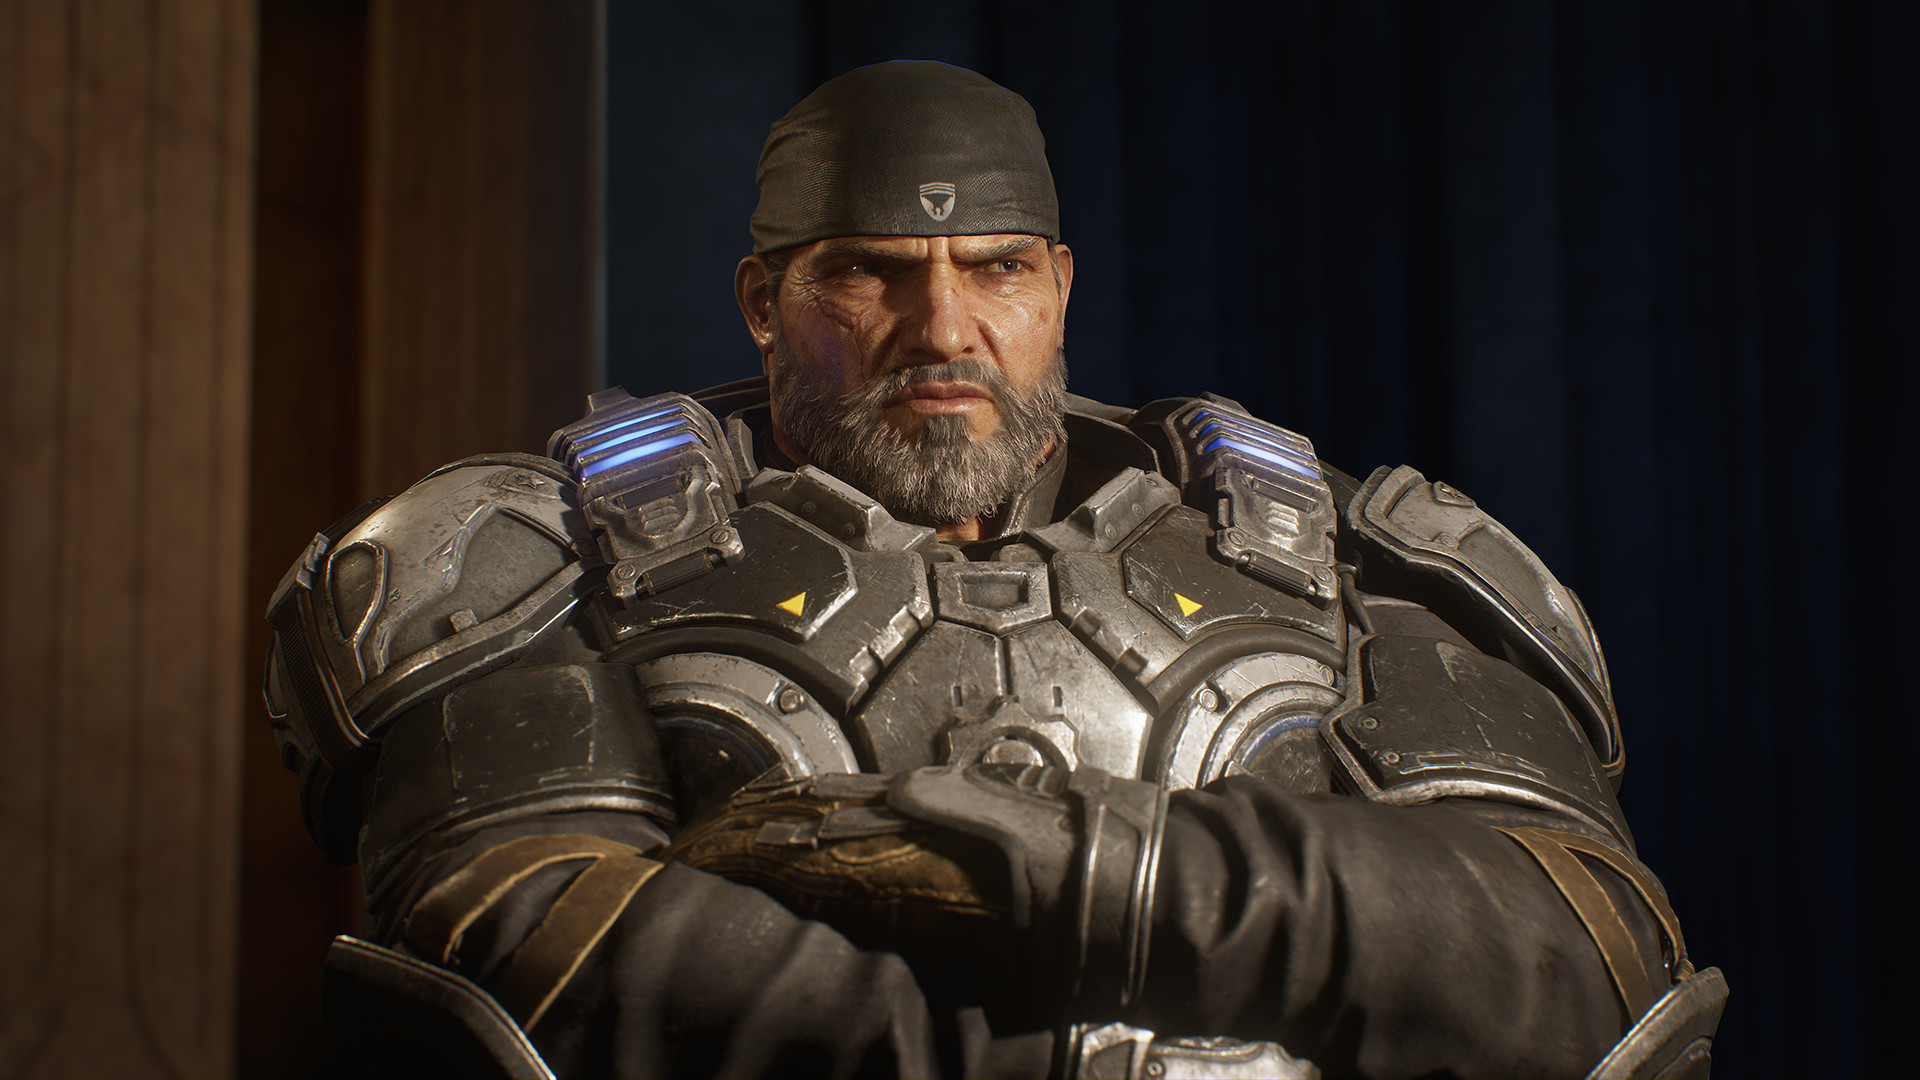 Gears 5 Review Roundup - See What The Critics Are Saying - GameSpot